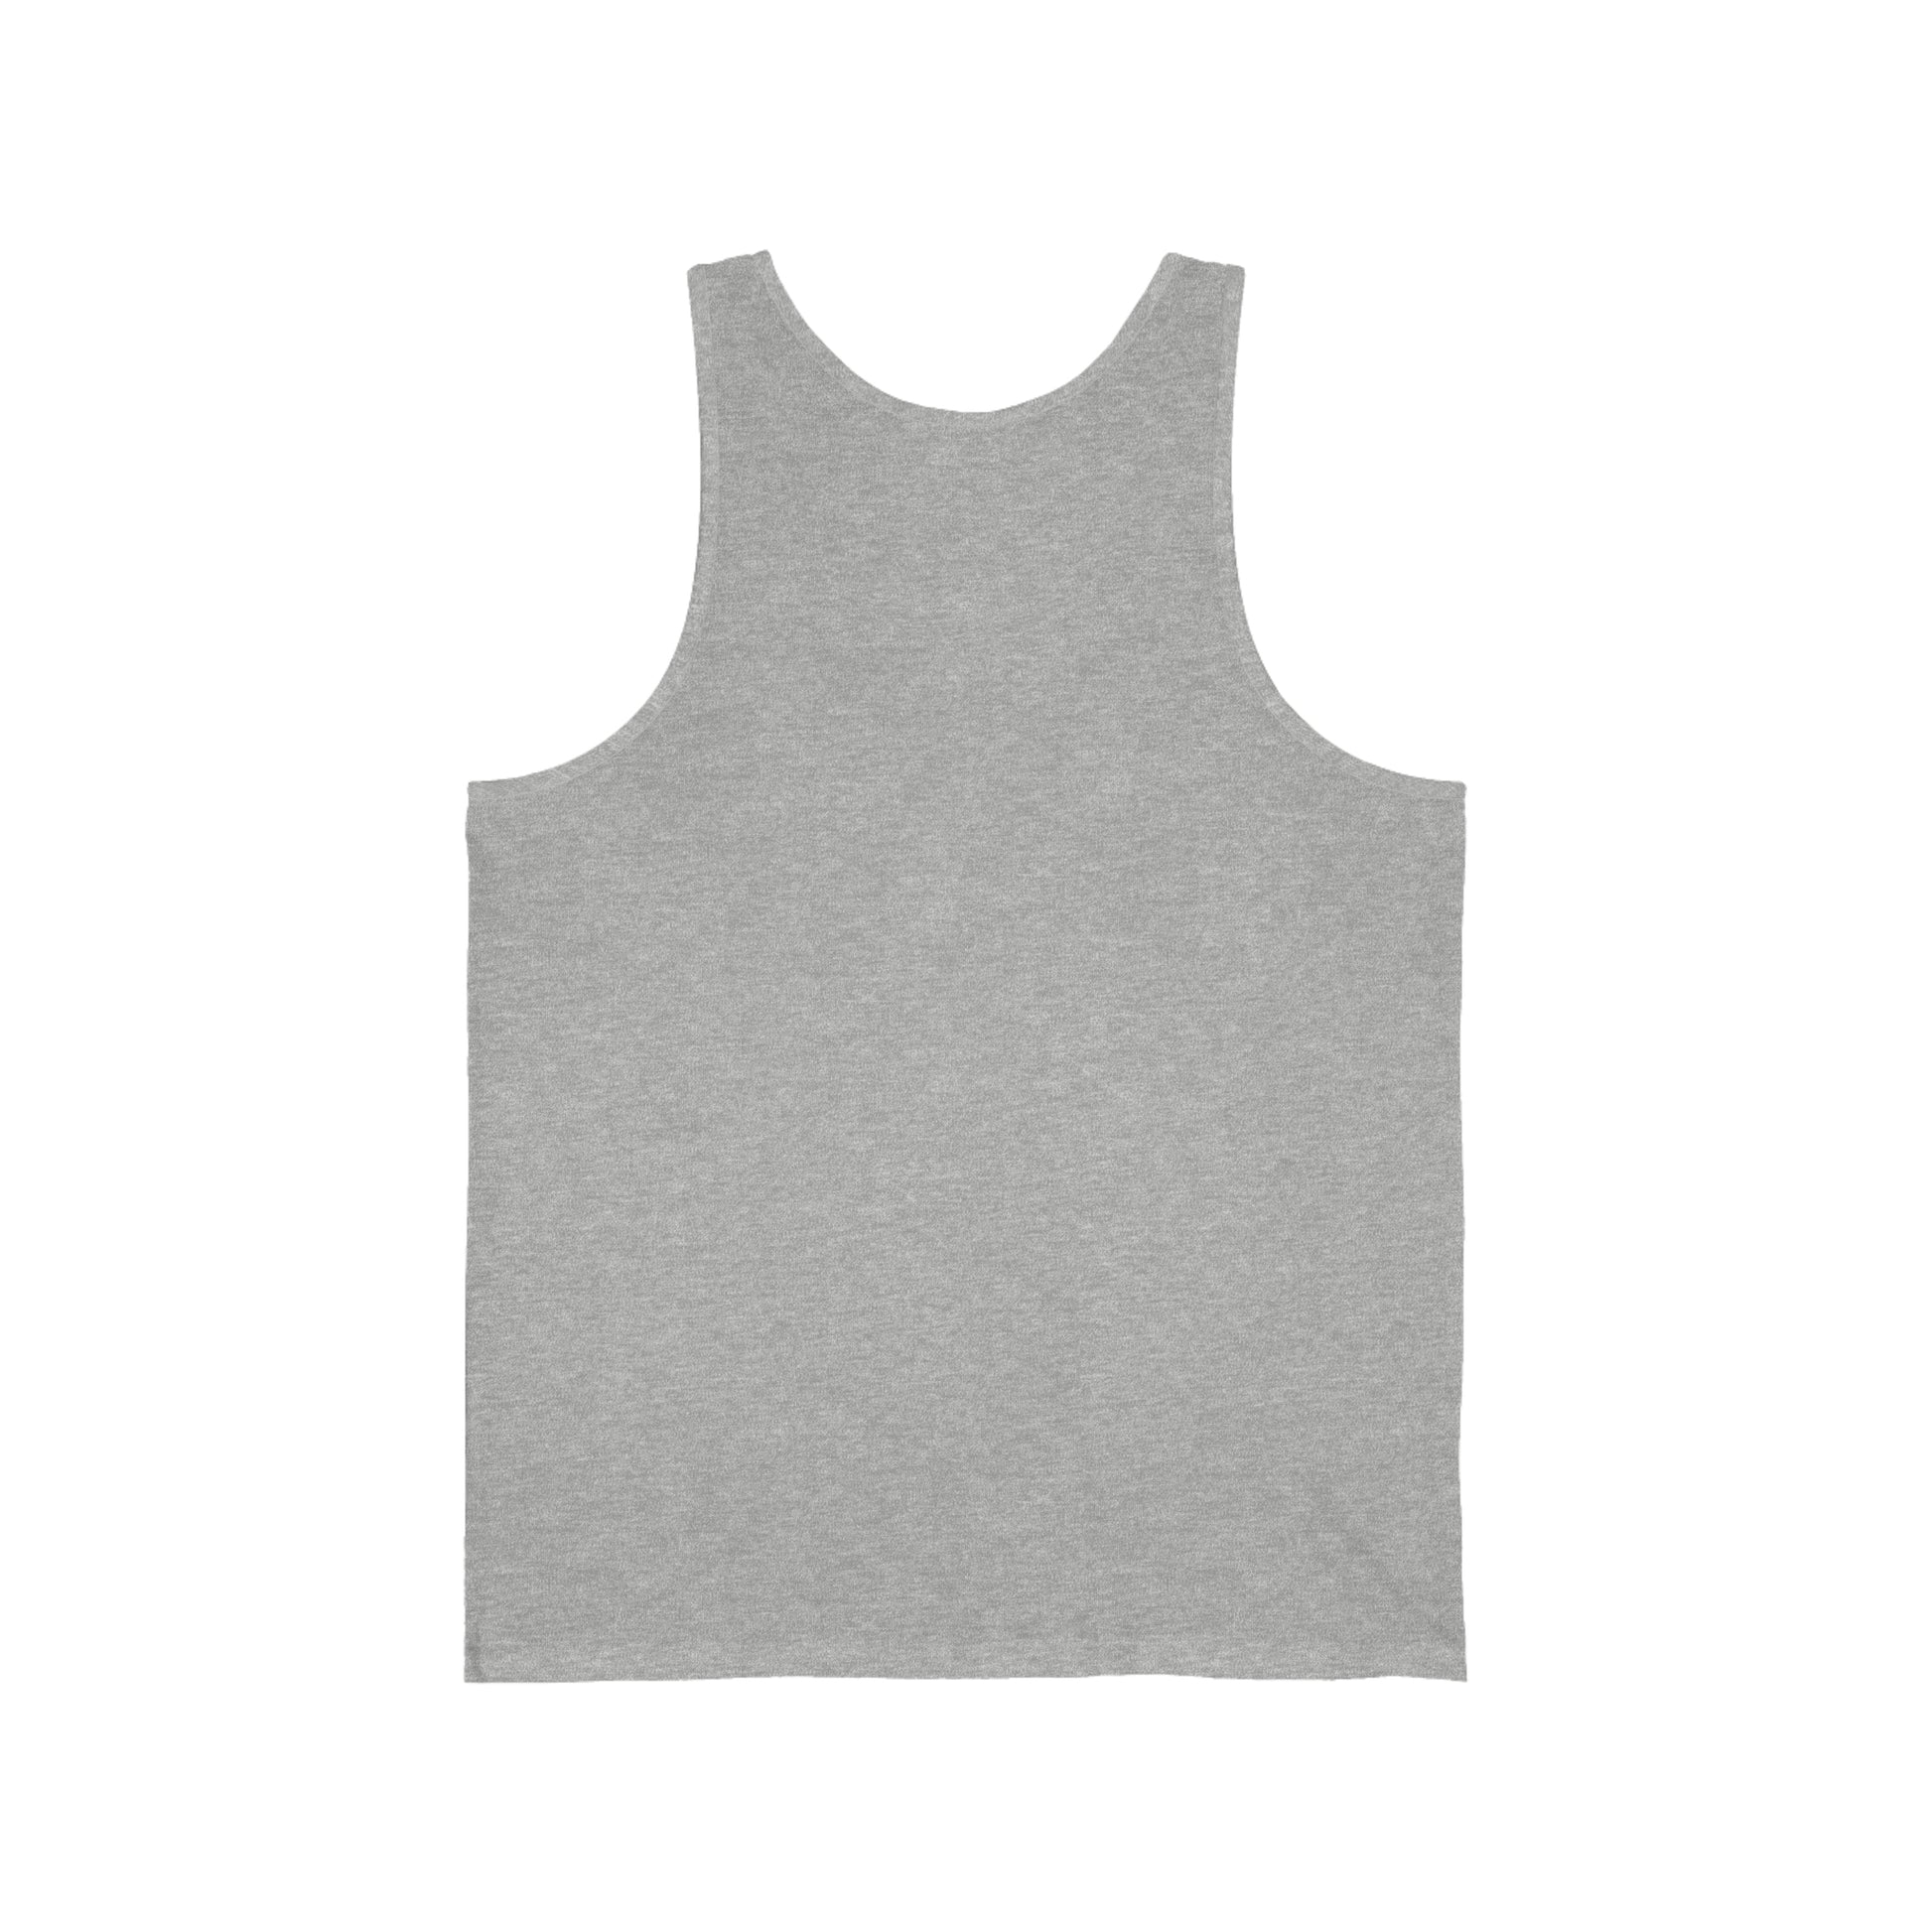 A Printify Unisex Jersey Tank displayed against a white background, reminiscent of a style popular in Toronto's Cabbagetown neighborhood.